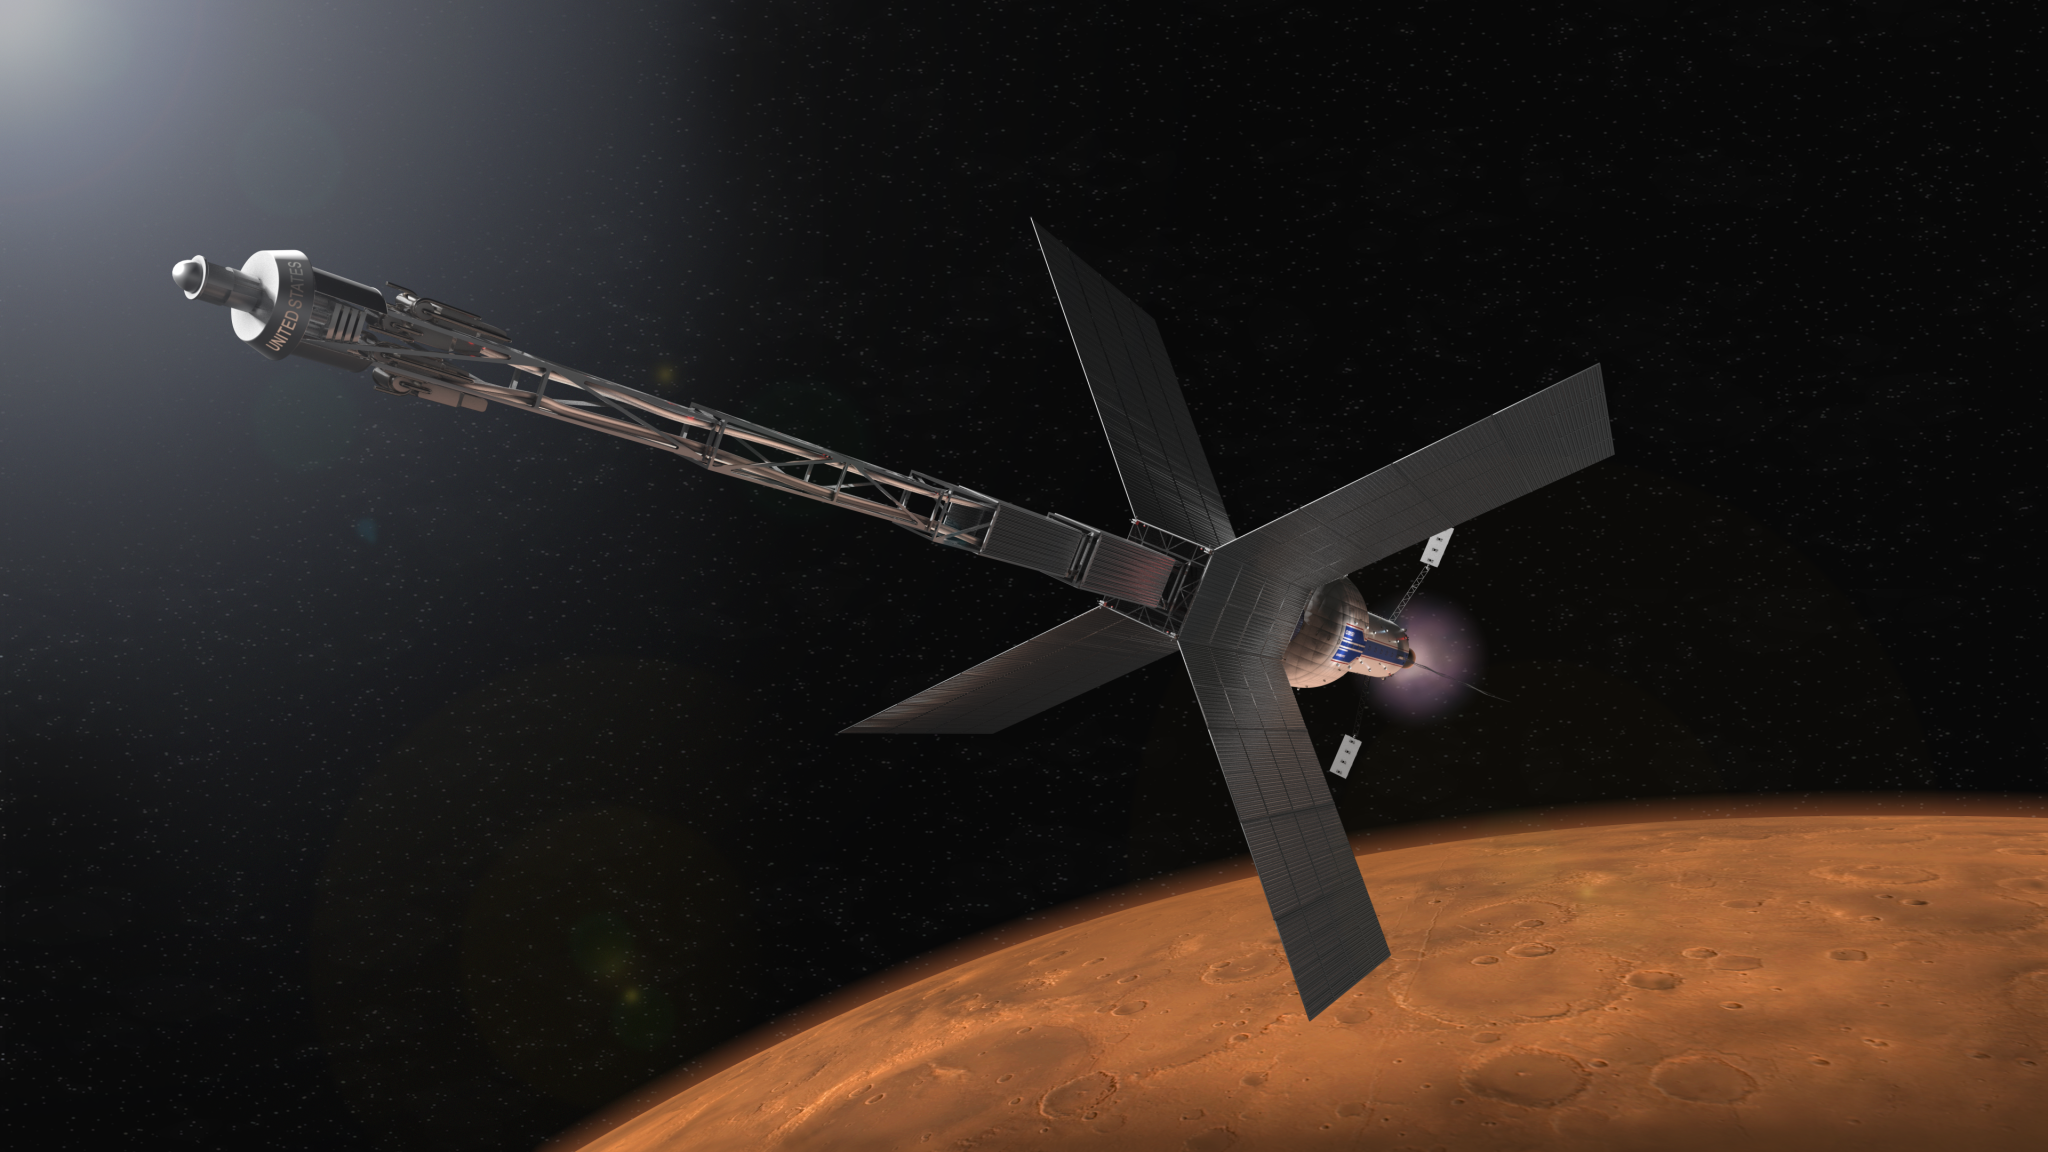 Illustration of a Mars transit habitat and nuclear propulsion system